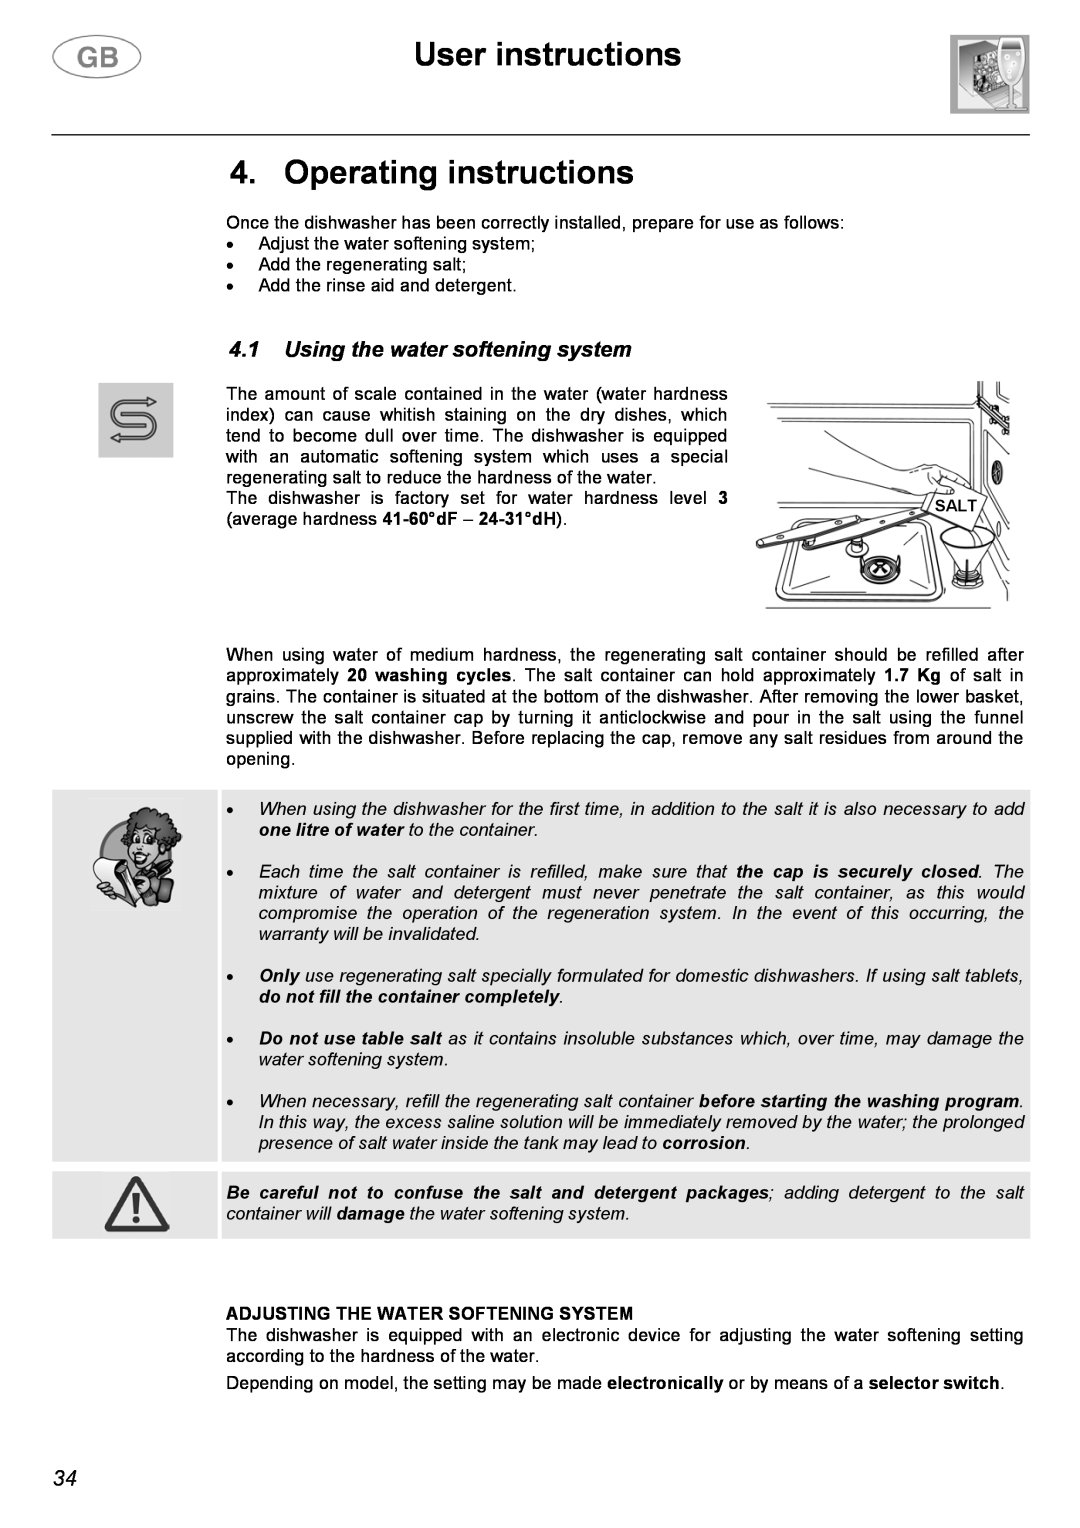 Smeg DW612ST instruction manual User instructions 4. Operating instructions, 4.1Using the water softening system 